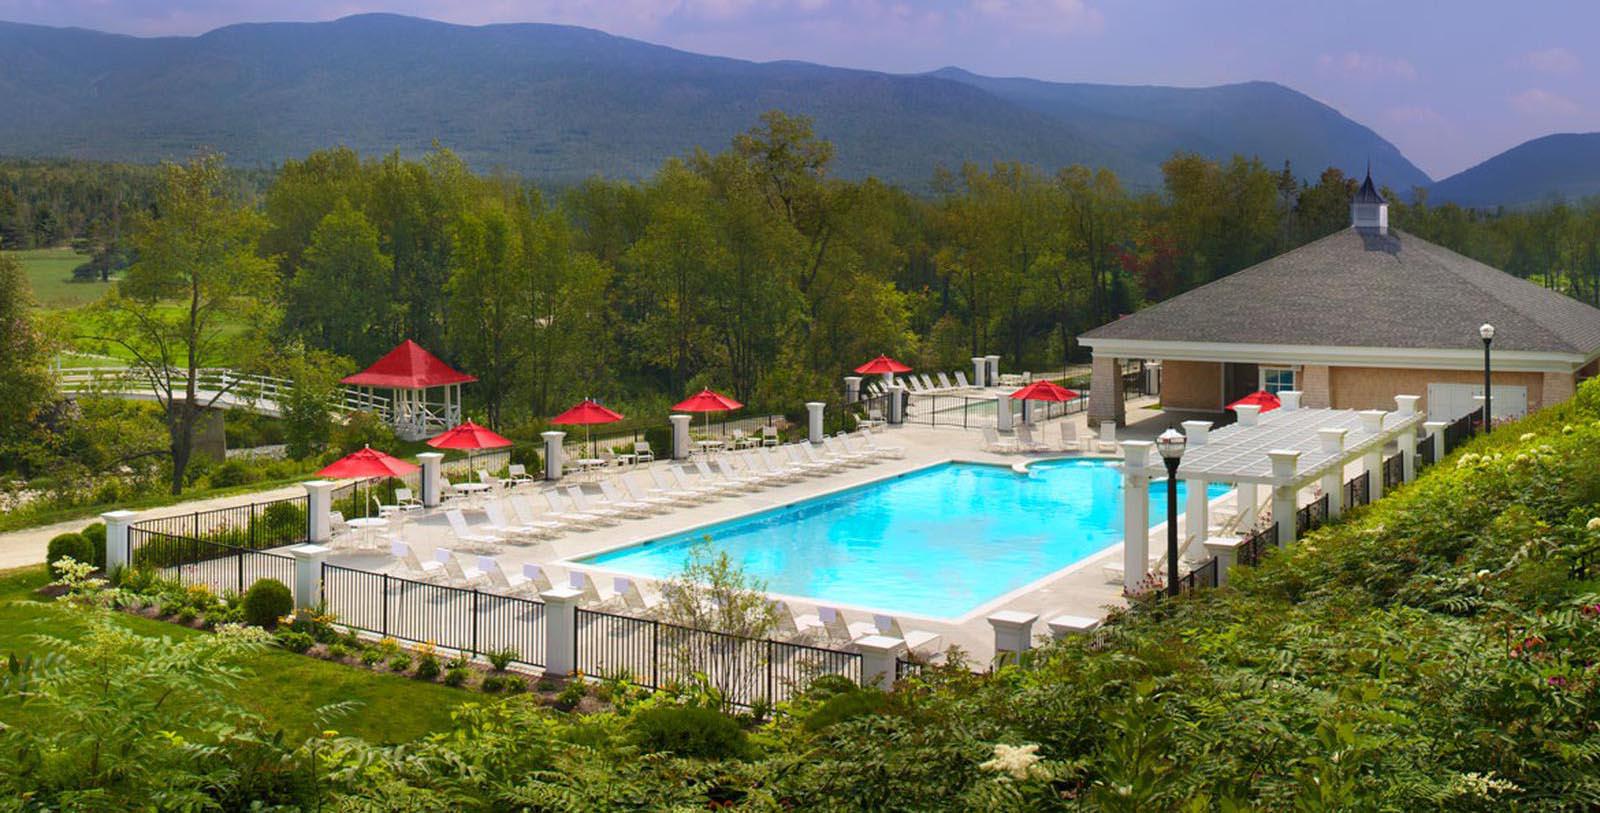 Image of Outdoor Pool, Omni Bretton Arms Inn, Bretton Woods, New Hampshire, 1896, Member of Historic Hotels of America, Hot Deals